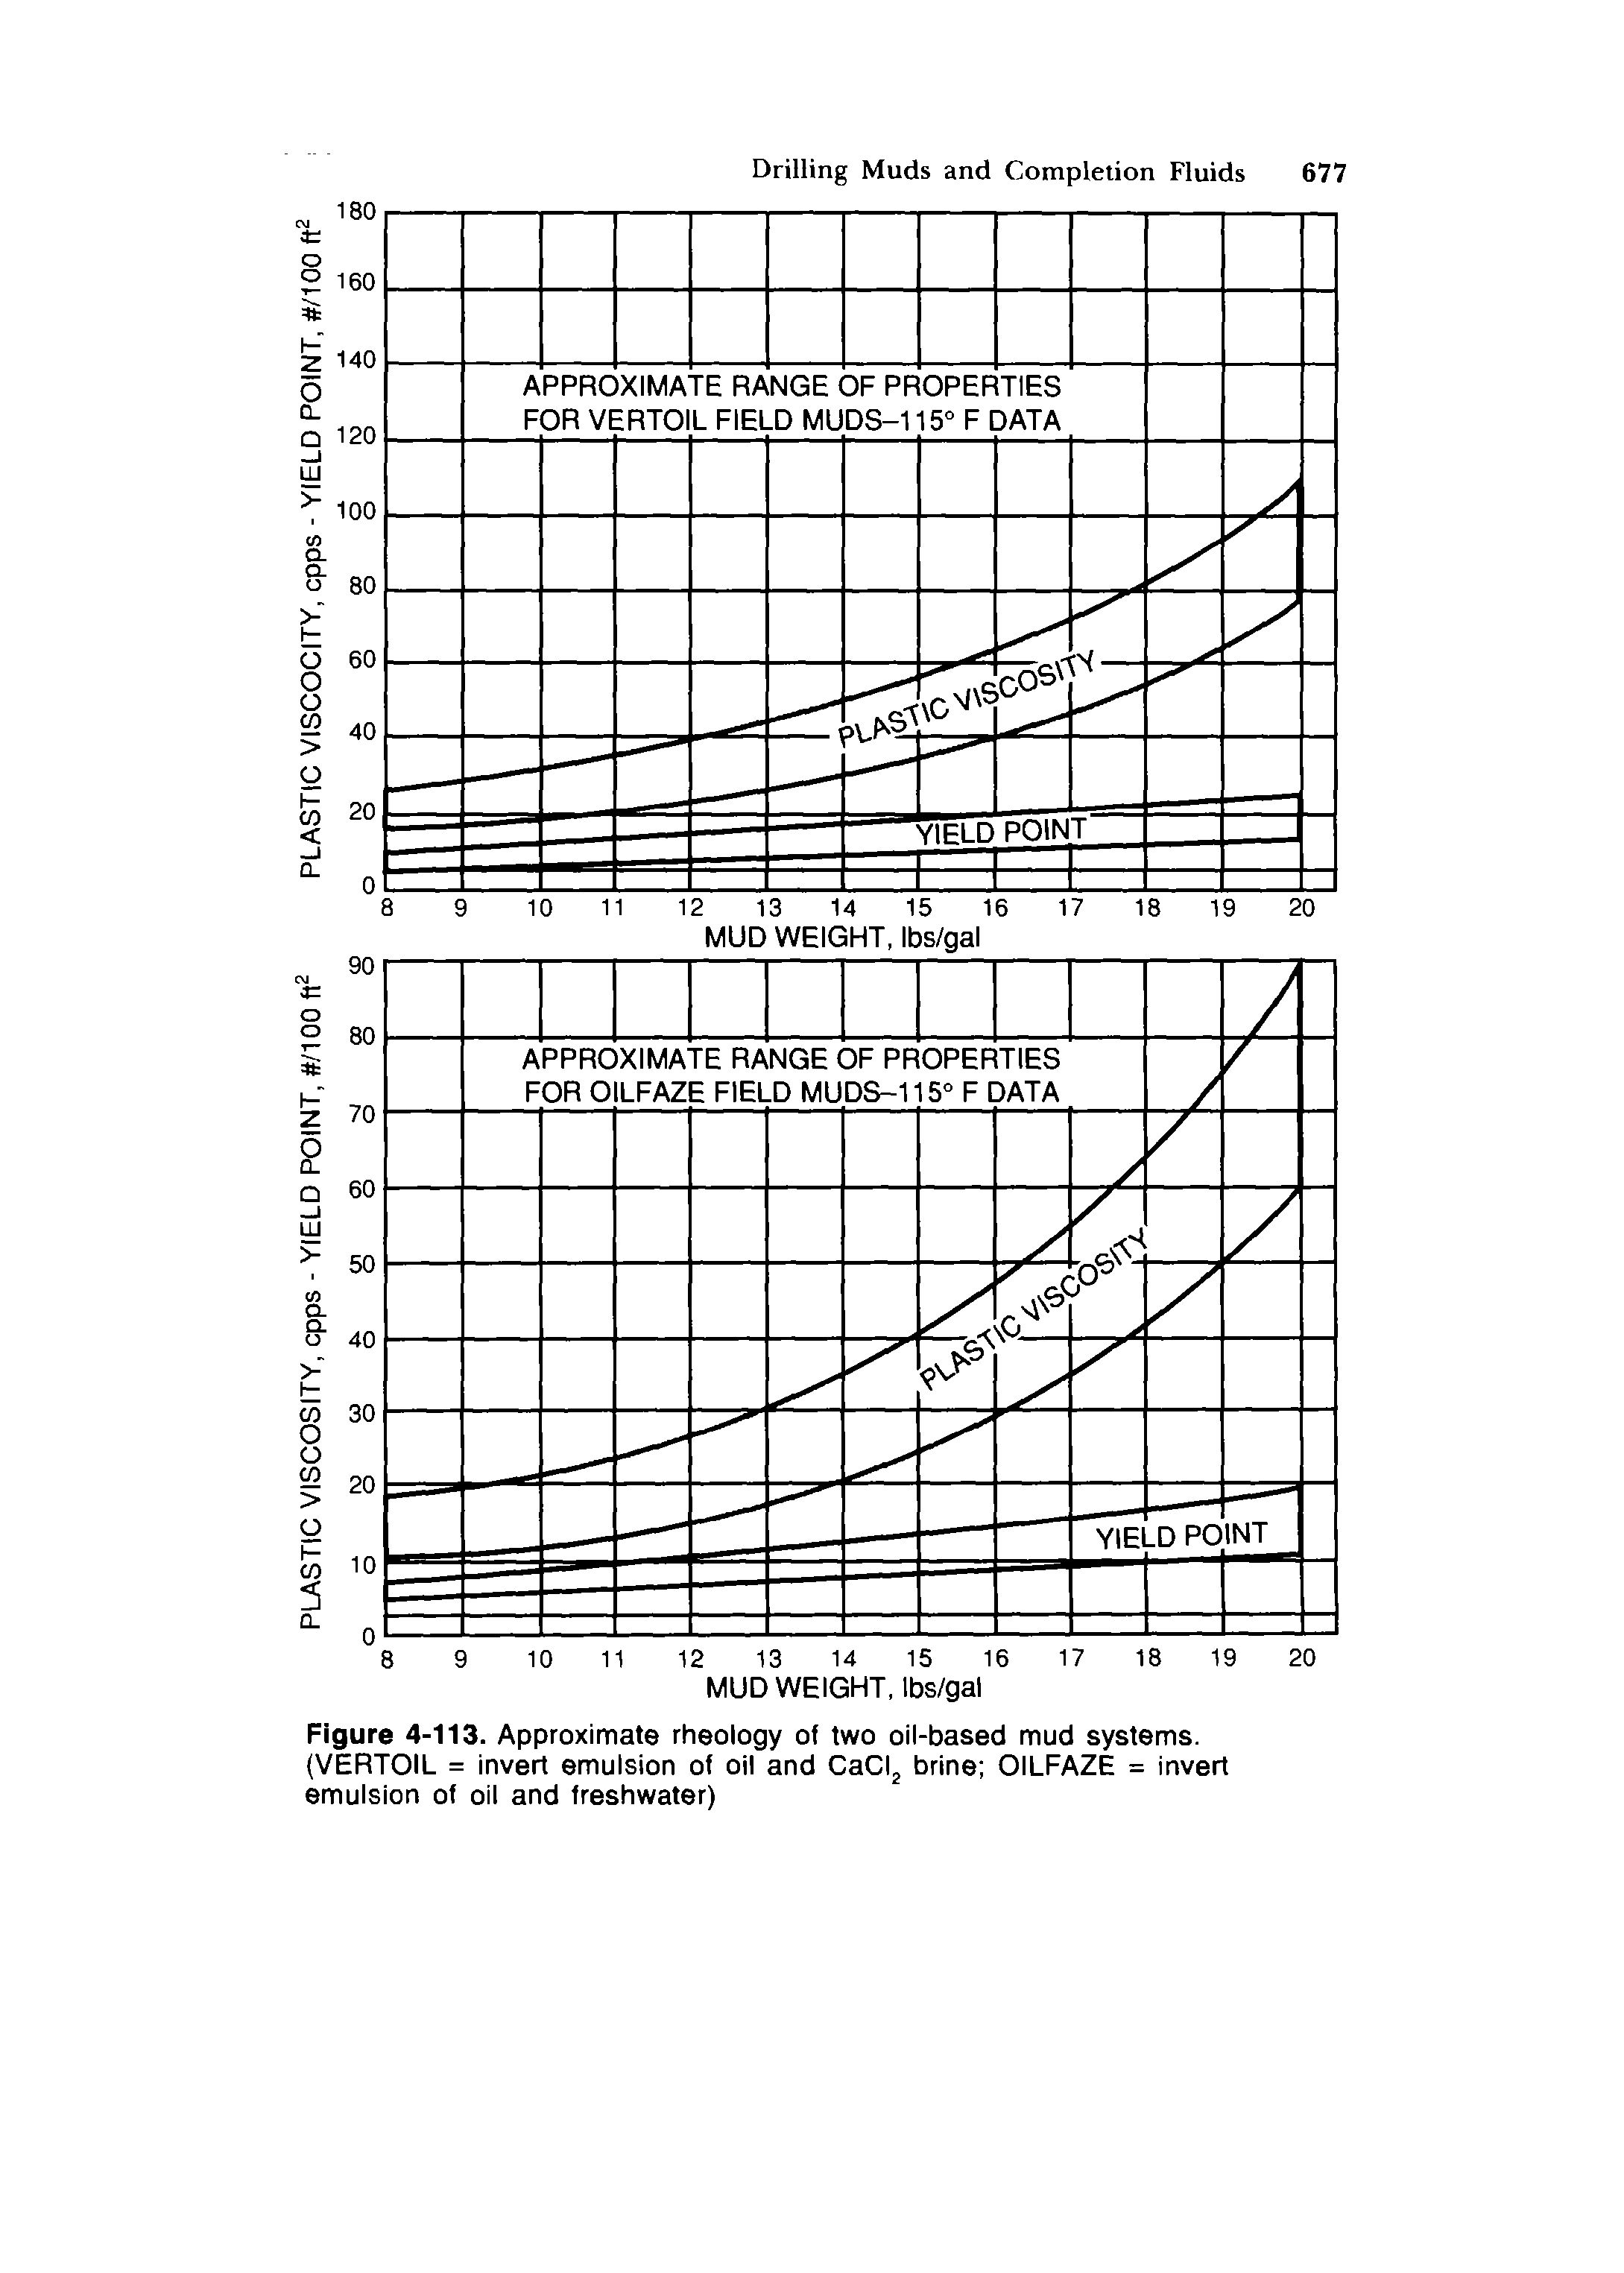 Figure 4-113. Approximate rheology of two oil-based mud systems. (VERTOIL = invert emulsion of oil and CaClj brine OILFAZE = invert emulsion of oil and freshwater)...